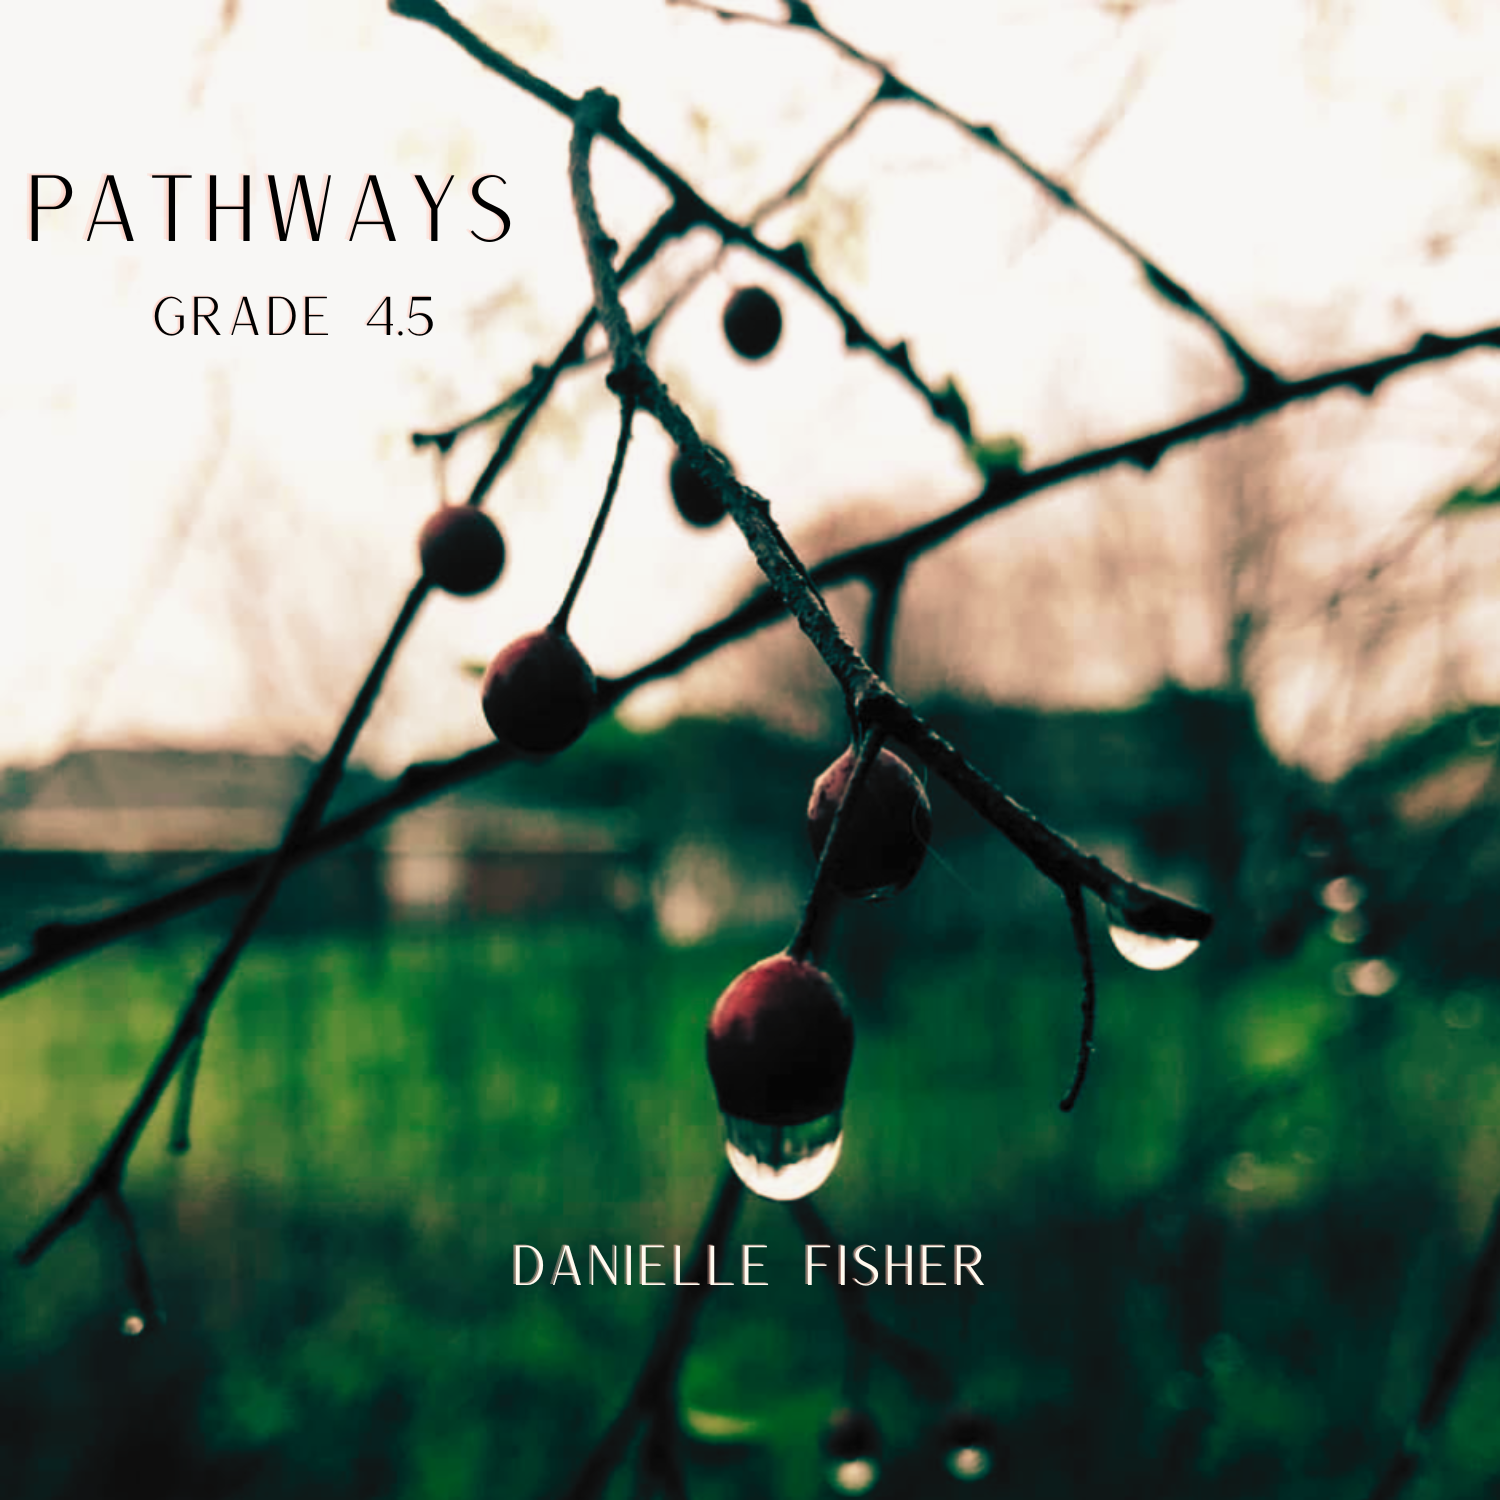 Pathways by Danielle Fisher